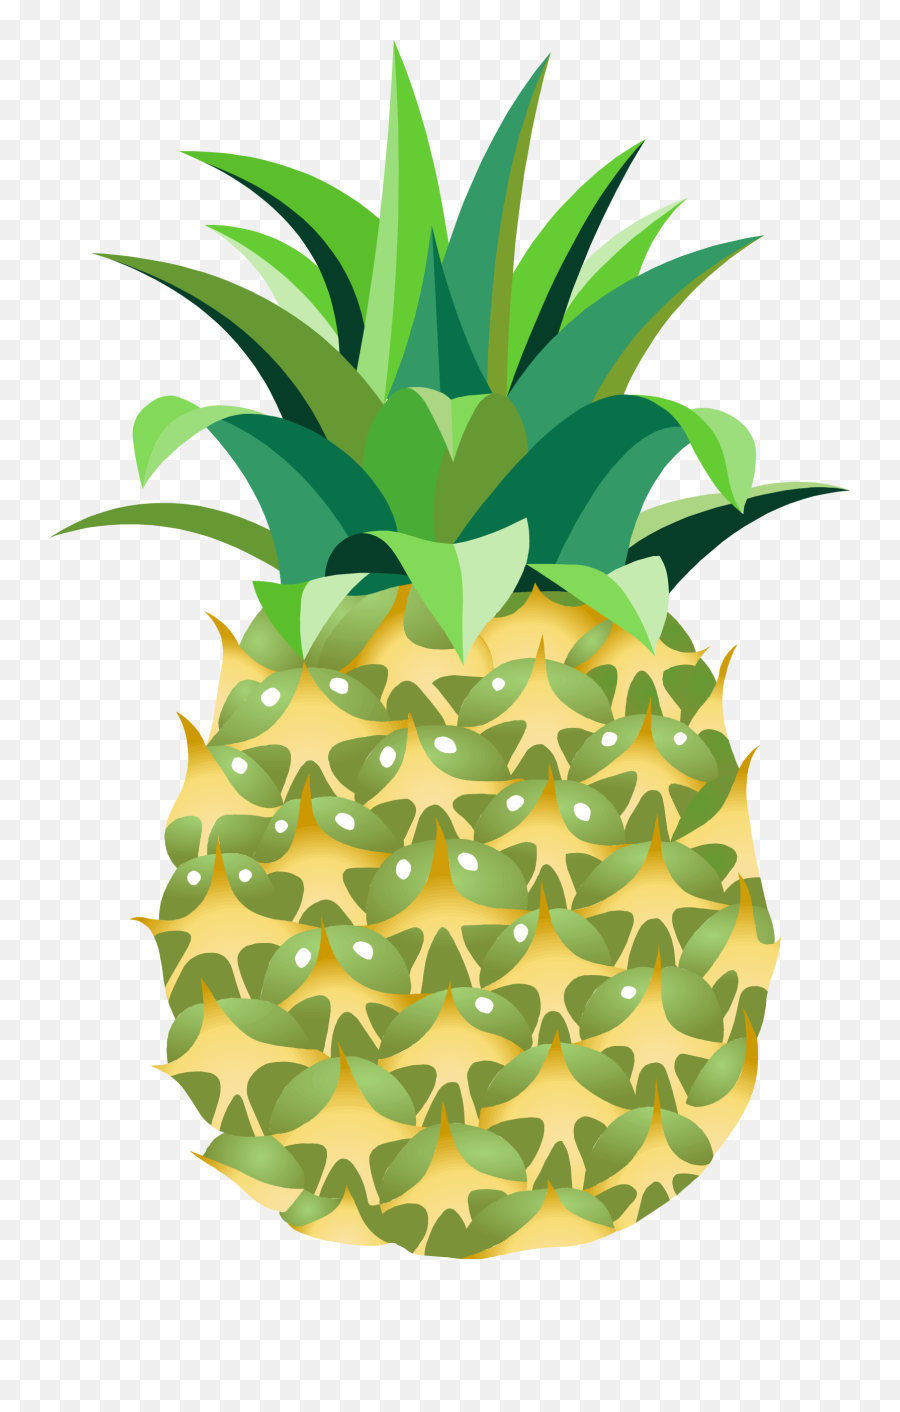 Pineapple Png Image - Clip Art Pineapple Transparent Background,Pineapple Clipart Png